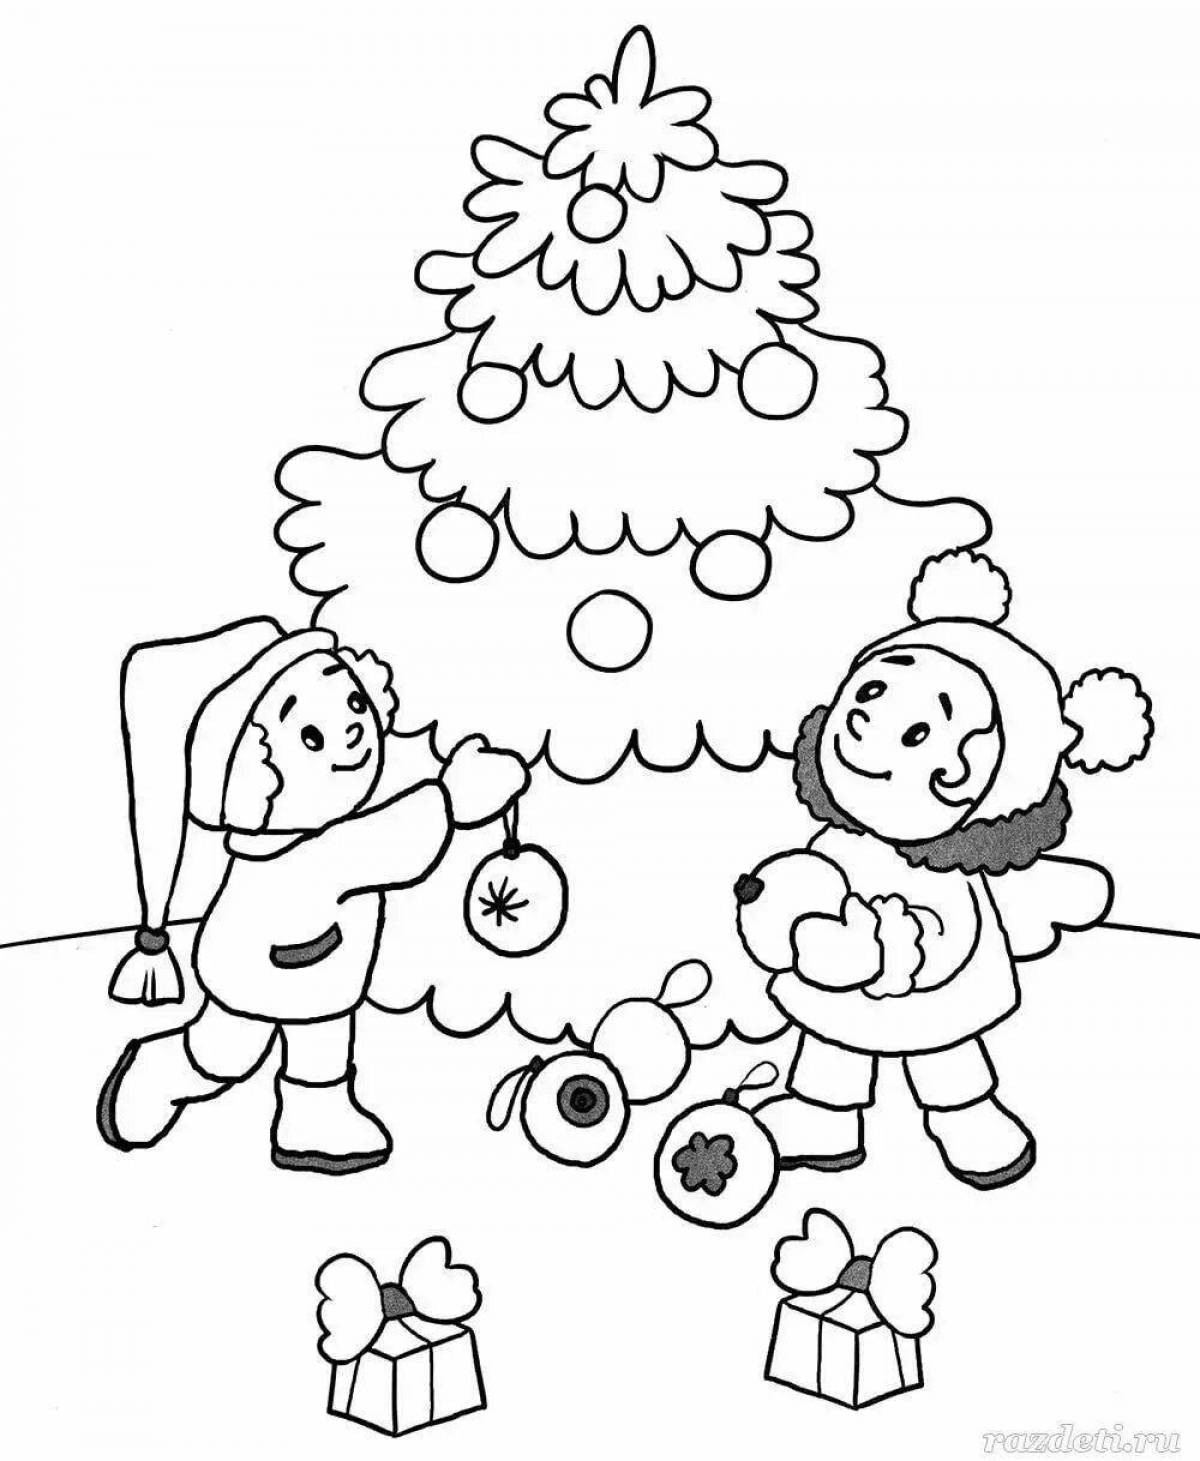 Exciting Christmas coloring book